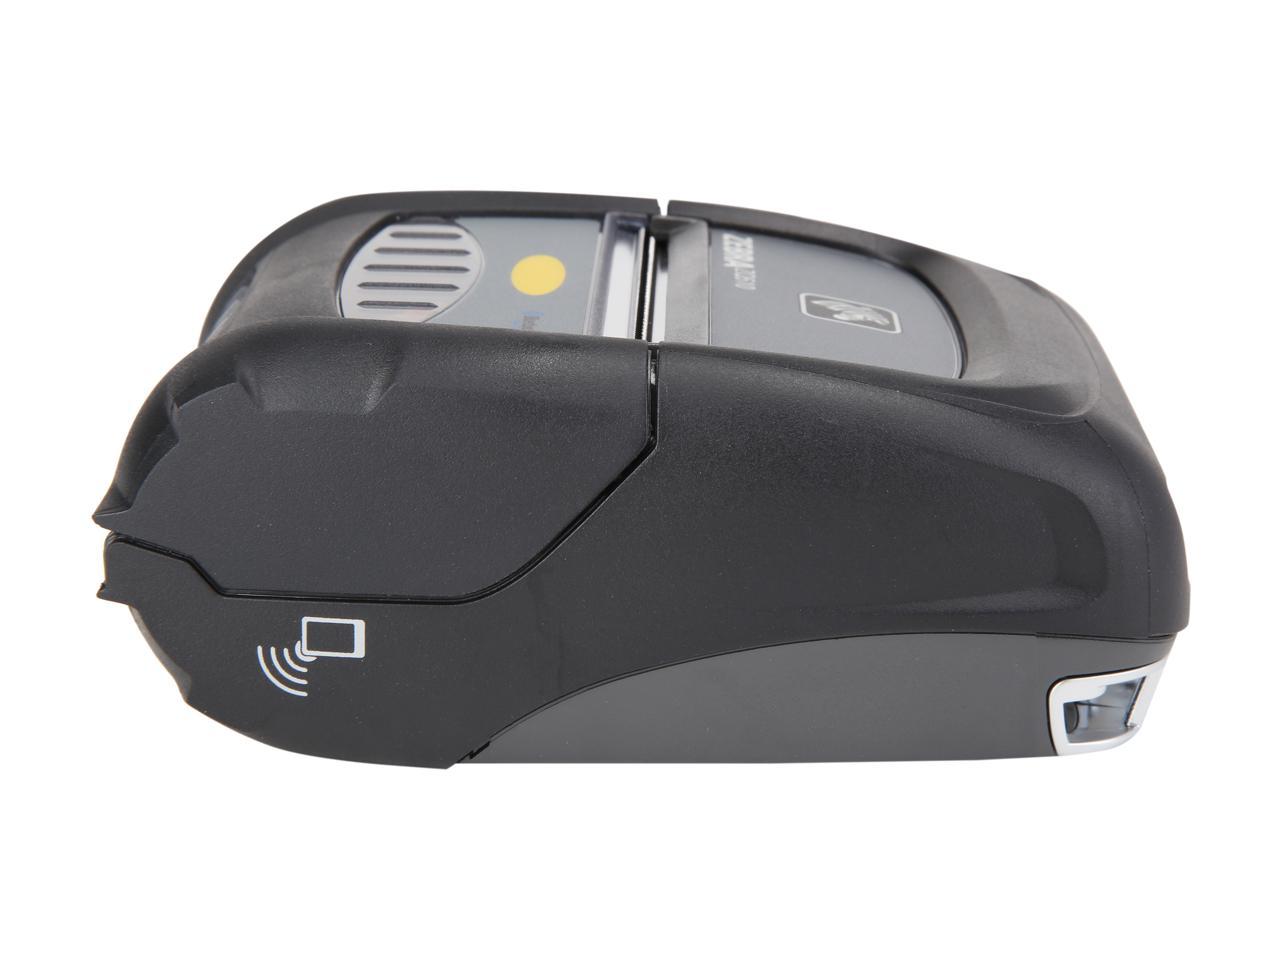 Zebra Zq510 3 Mobile Direct Thermal Receipt And Label Printer 203 Dpi Bluetooth 40 Linered 4589